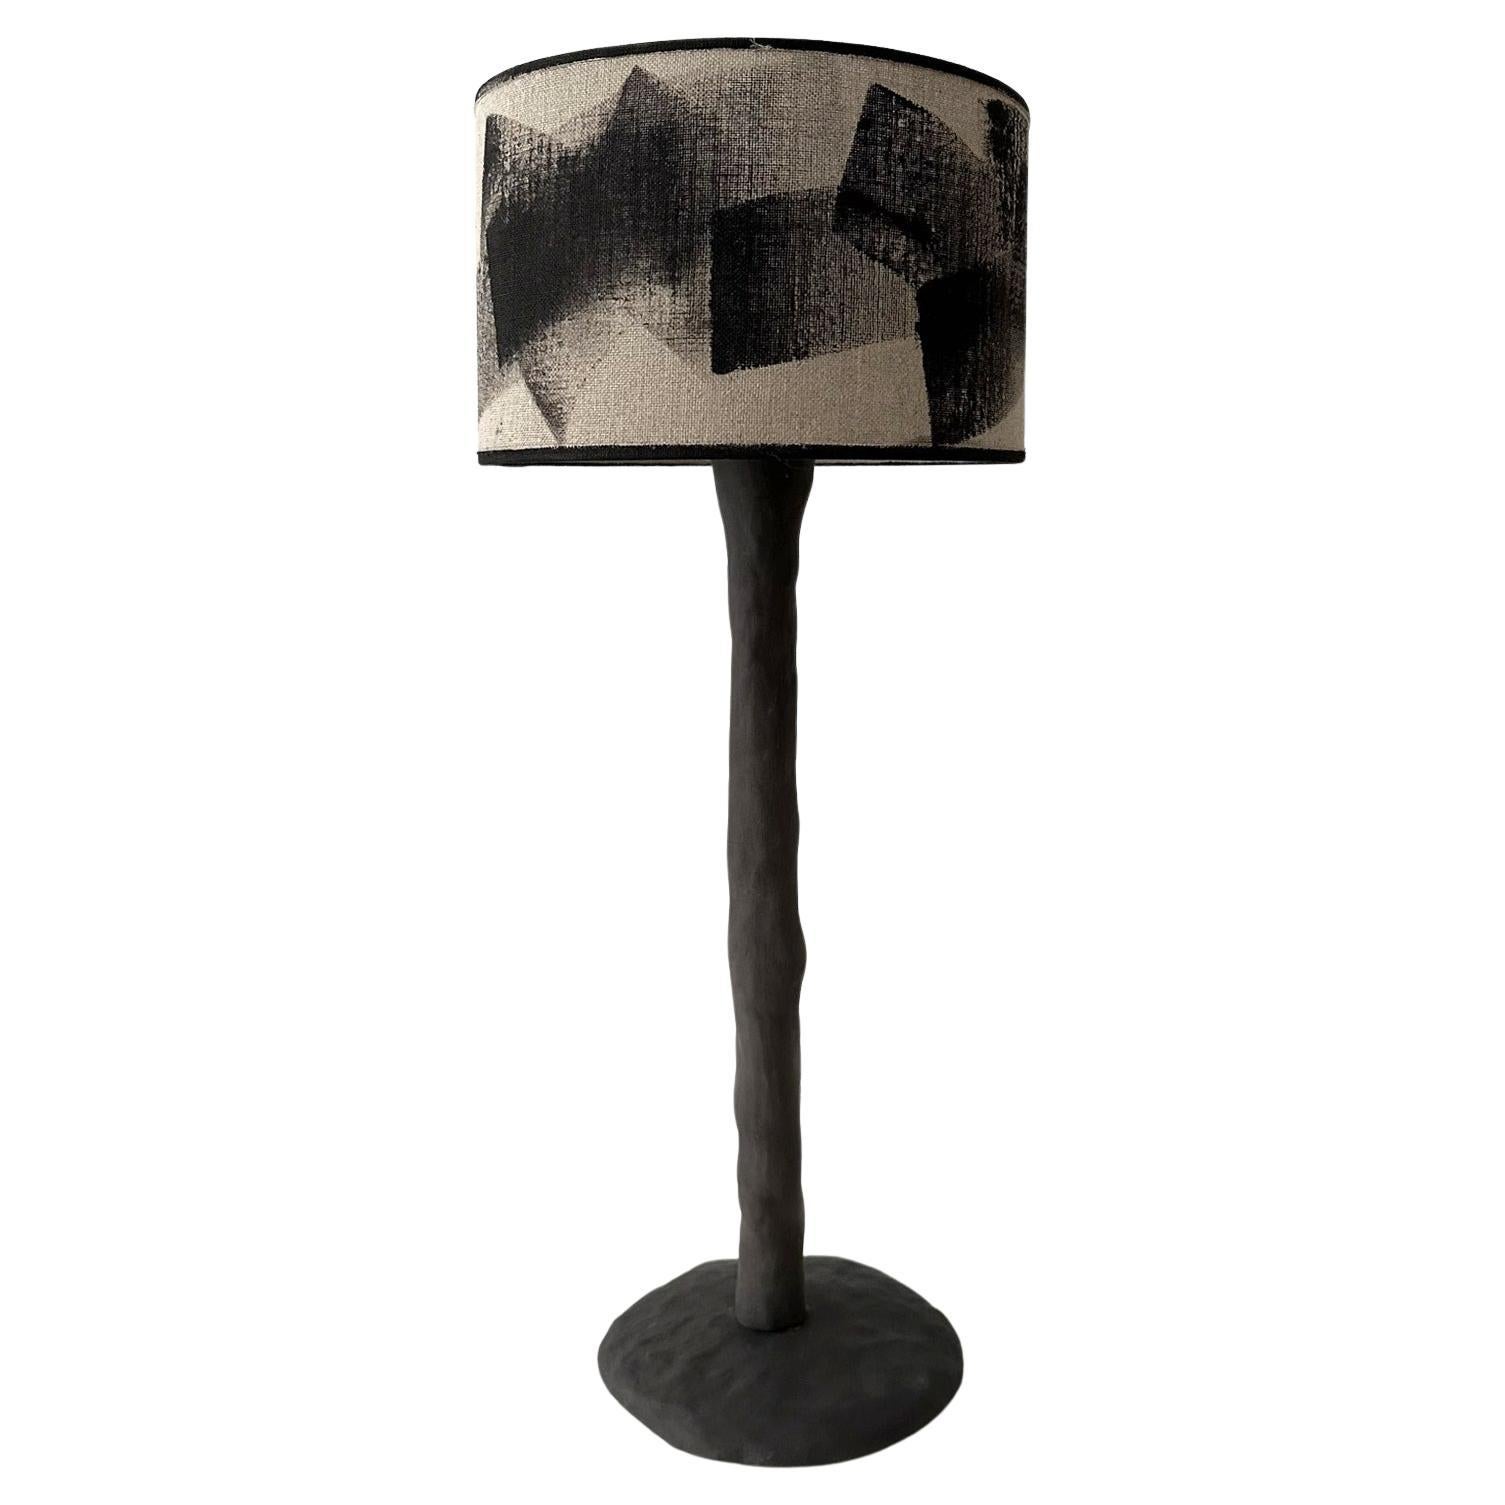 Abstract Wood Table Lamp by Atelier Monochrome